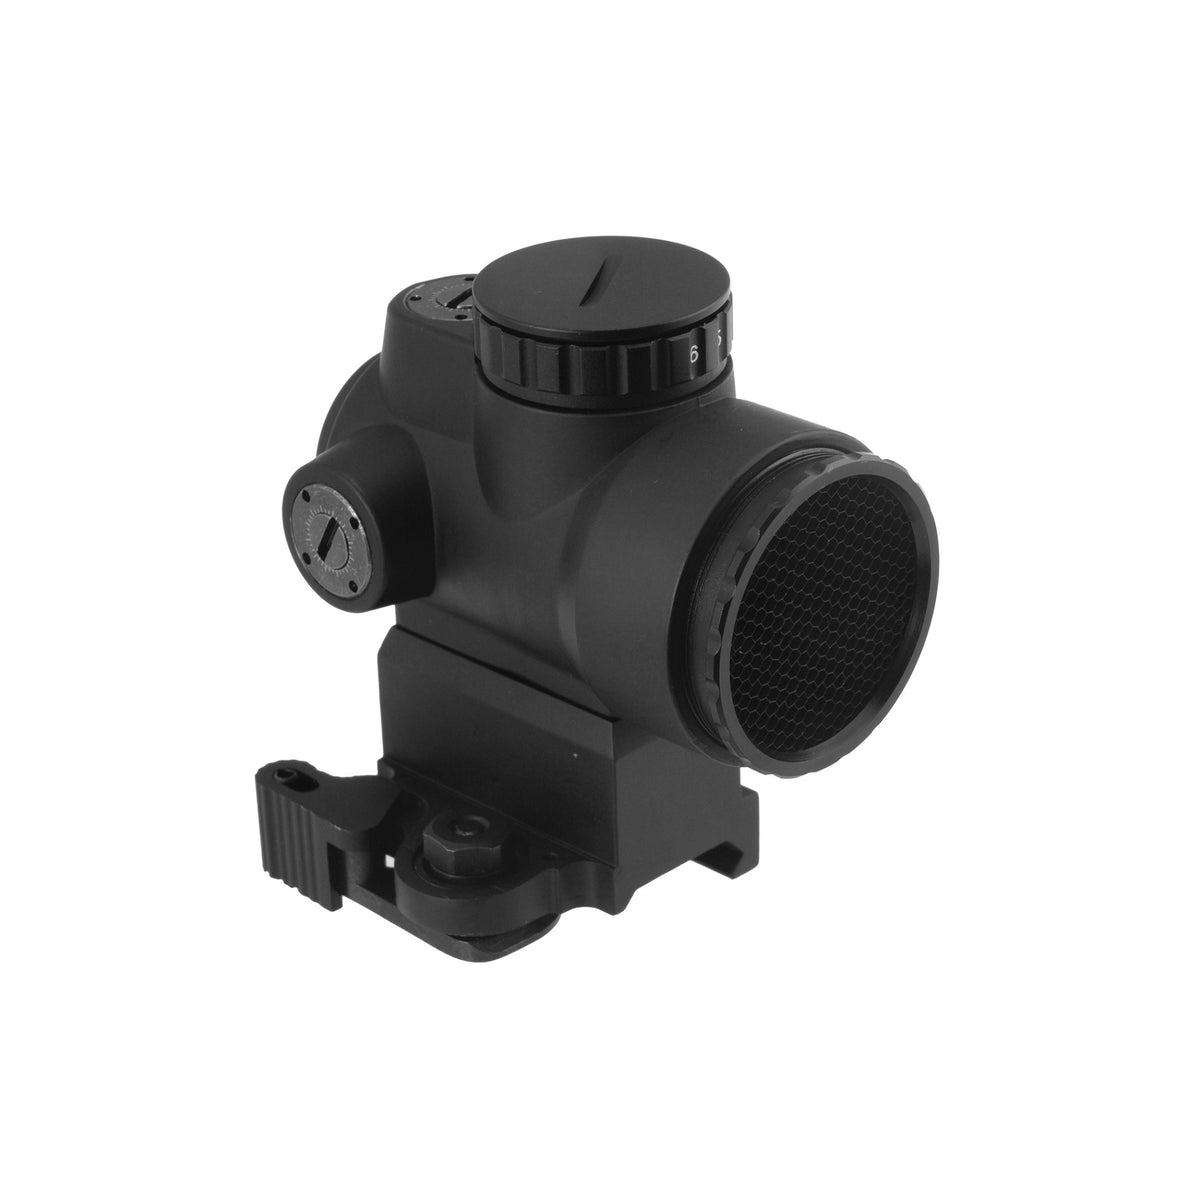 MRO Red Dot Sight Pack with Killflash